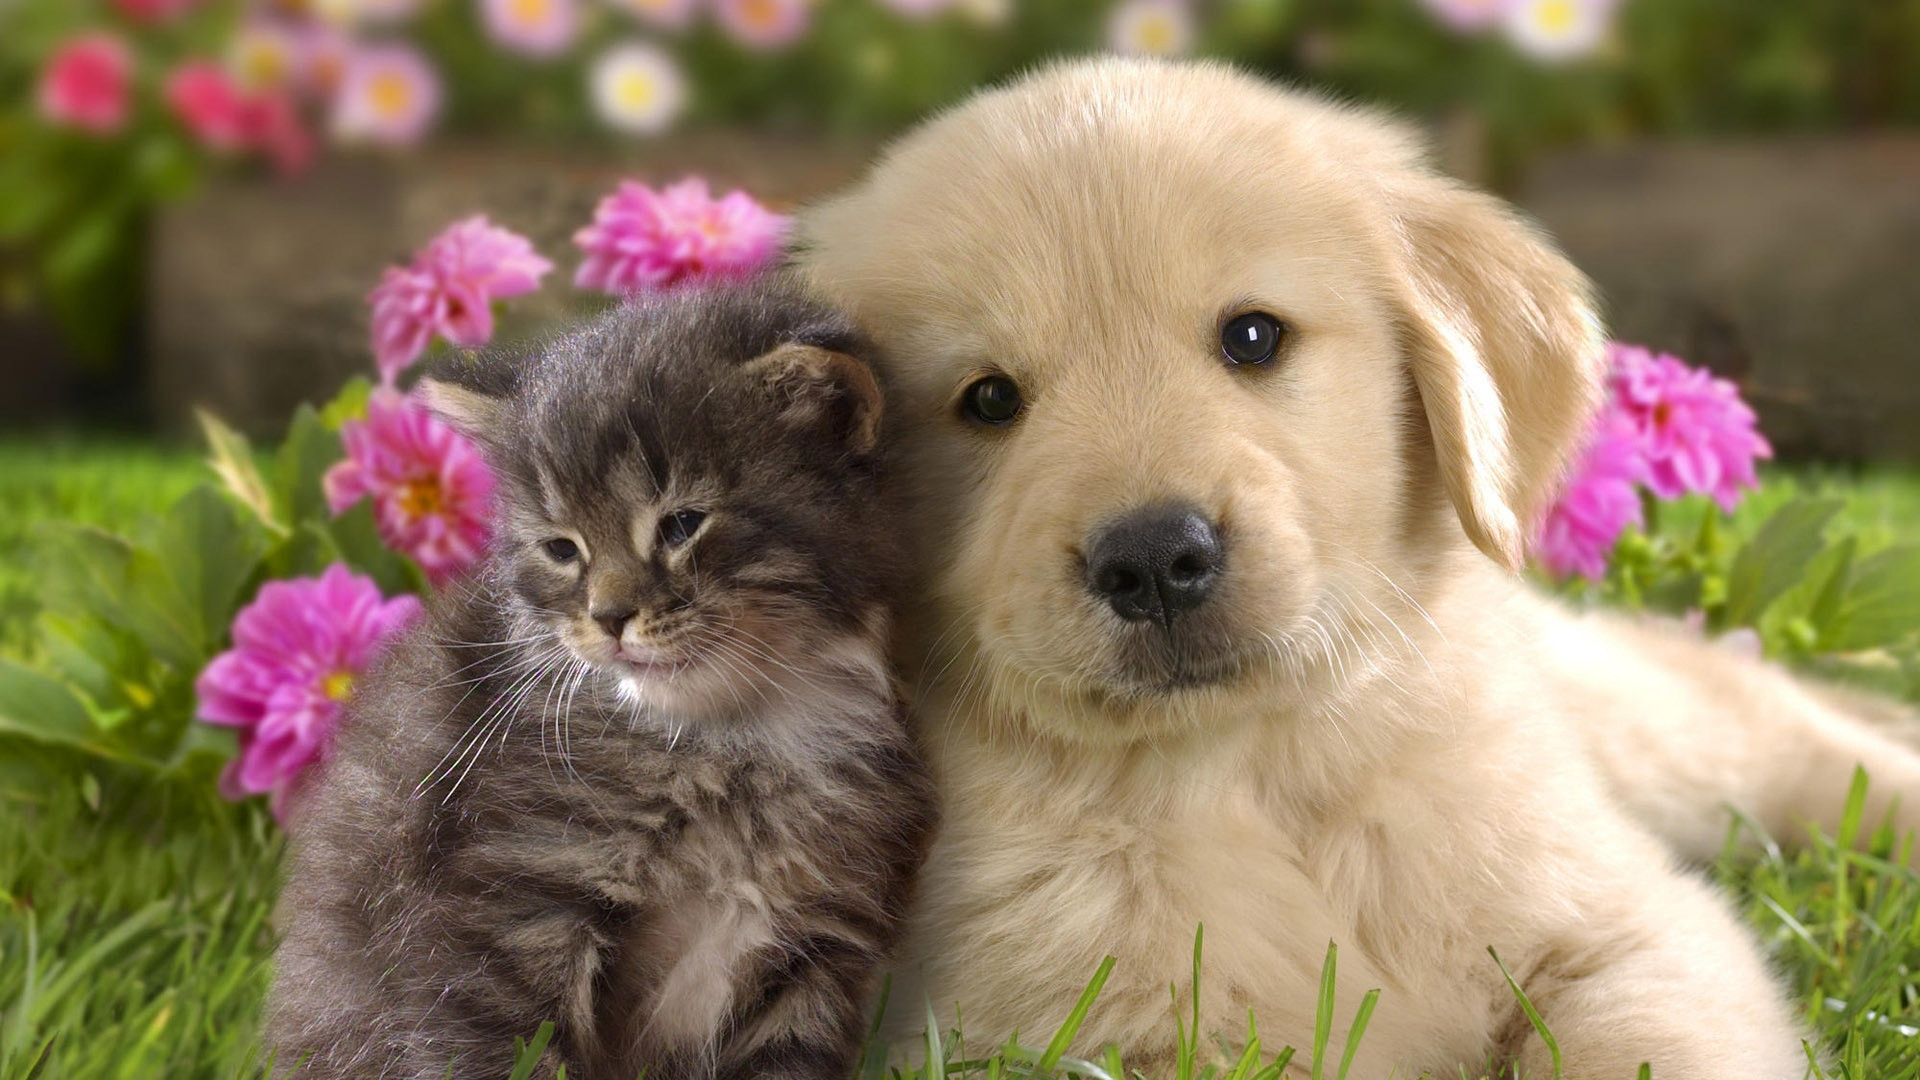 1920x1080 Pretty Full Hd 1080P Puppy Wallpapers Hd, Desktop Backgrounds 1920X1080 And  also Adorable Puppy Wallpaper